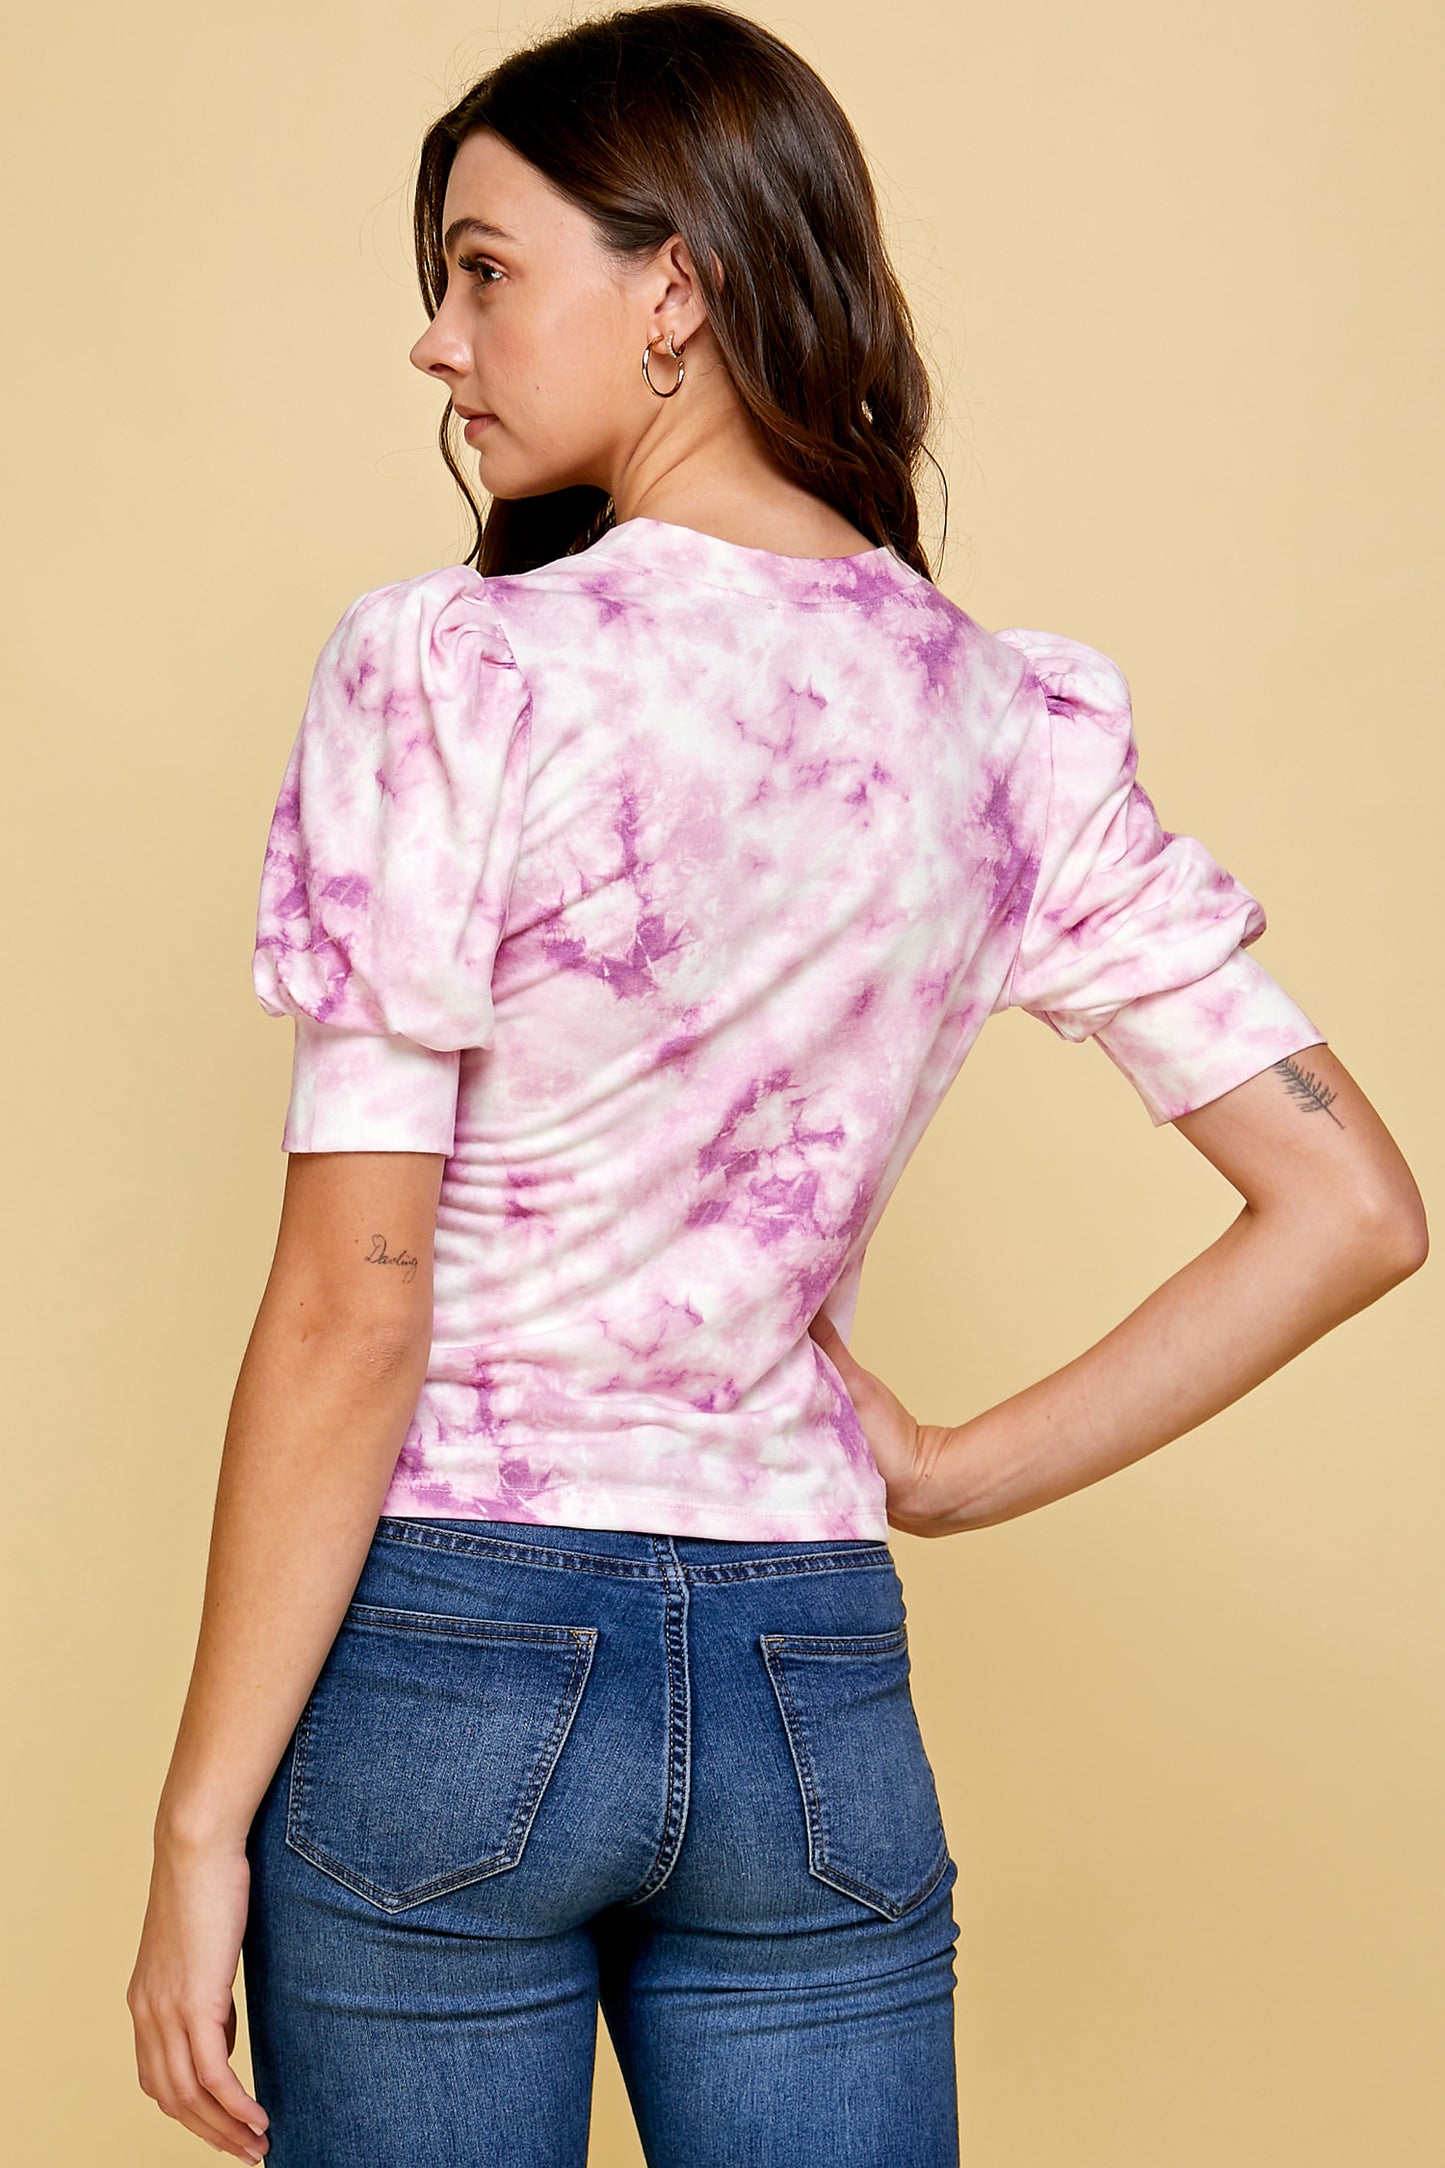 PINK TIE DYE SHIRT WITH PUFFED SLEEVE